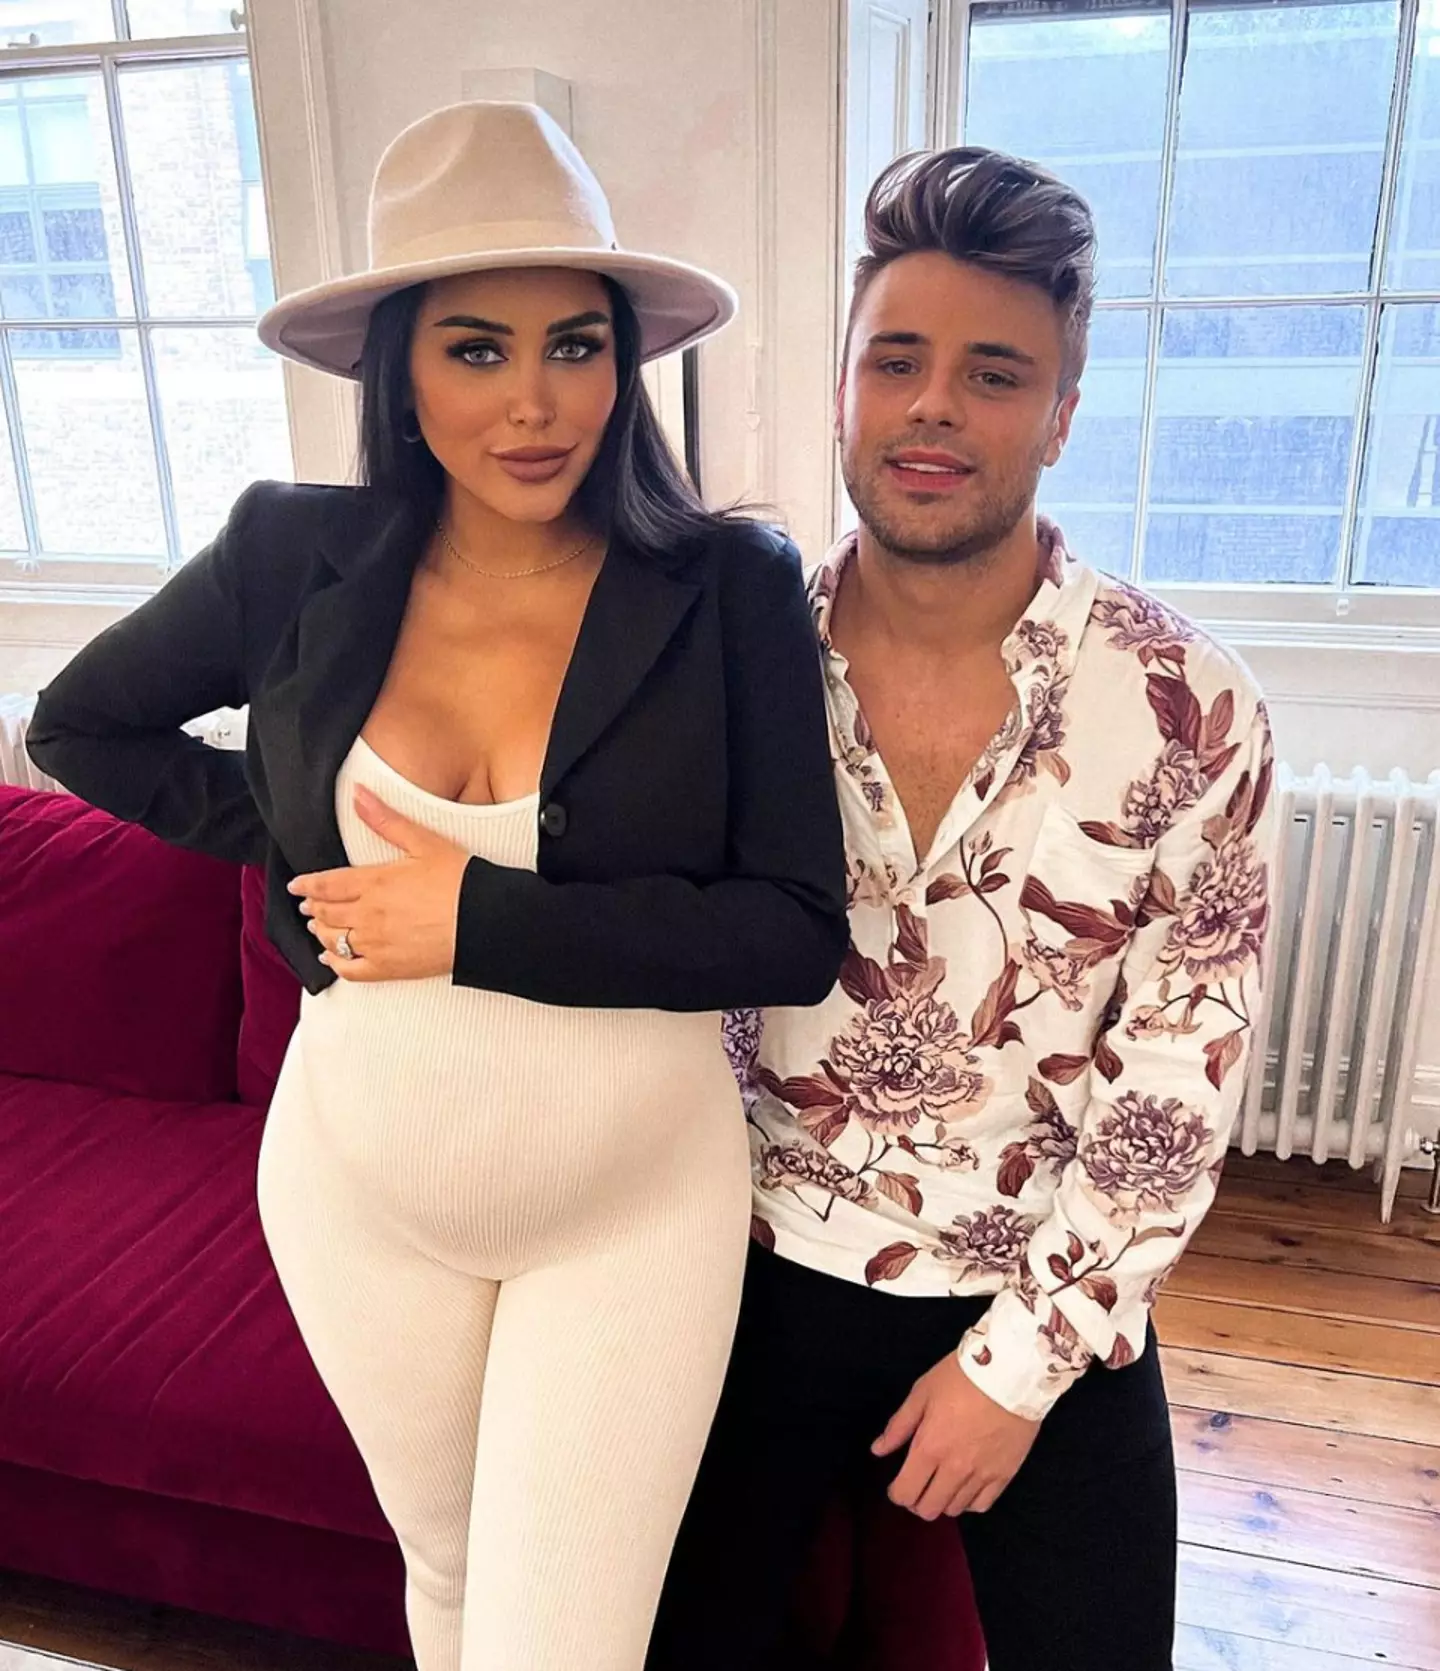 Former Geordie Shore star Marnie Simpson has shared her unusual baby name with fans